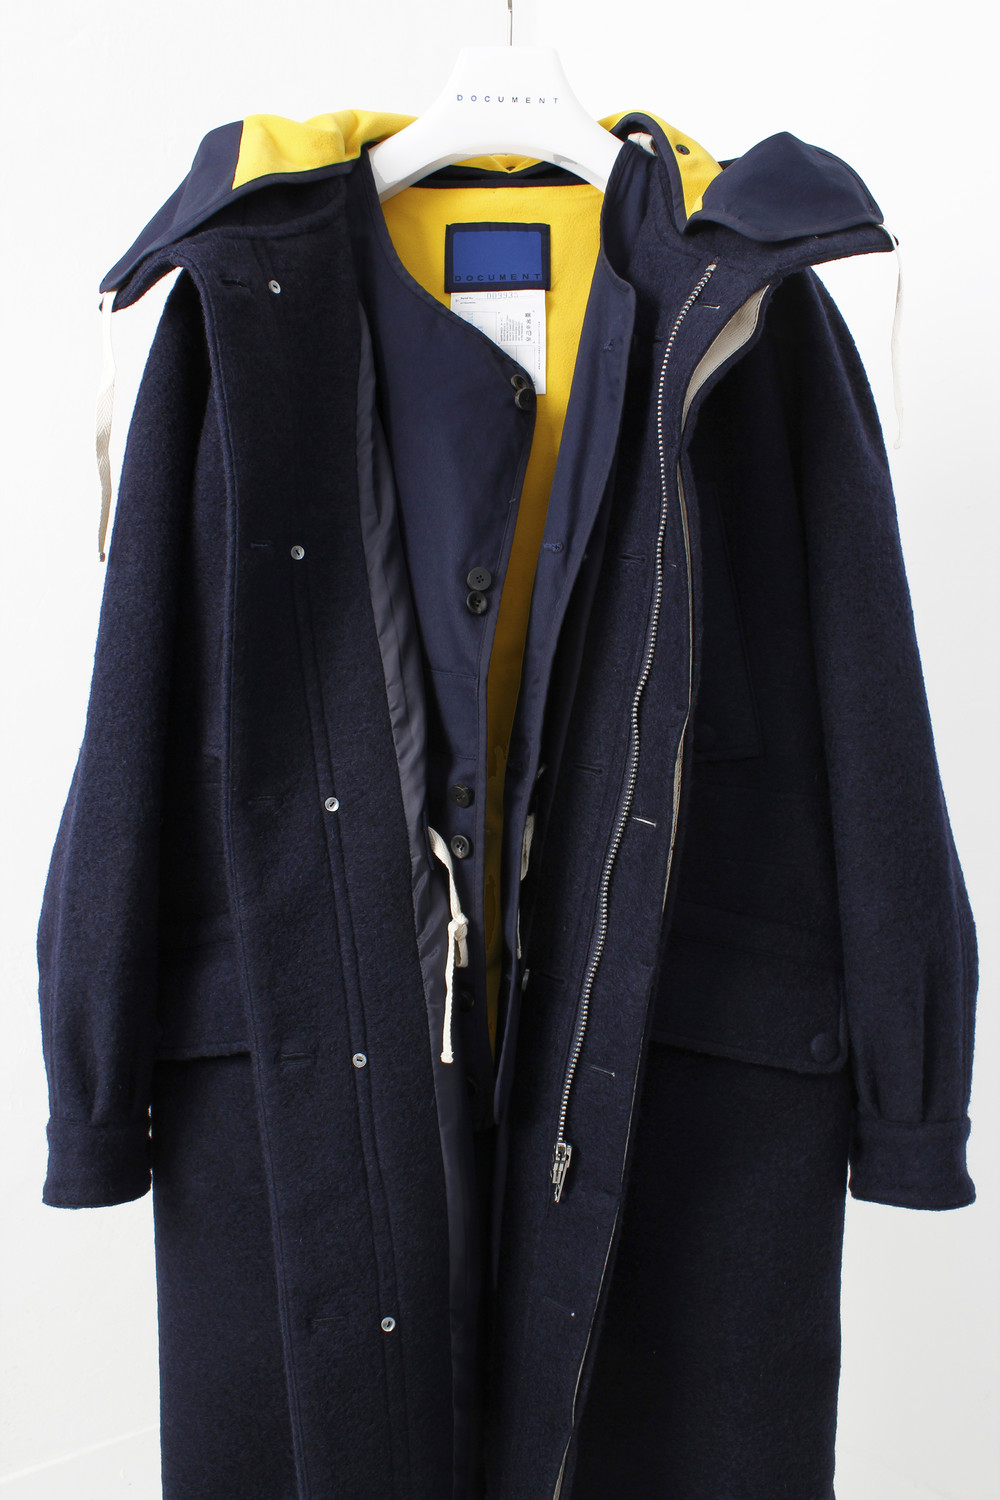 THE DOCUMENT WOOL PARKA _ YELLOW